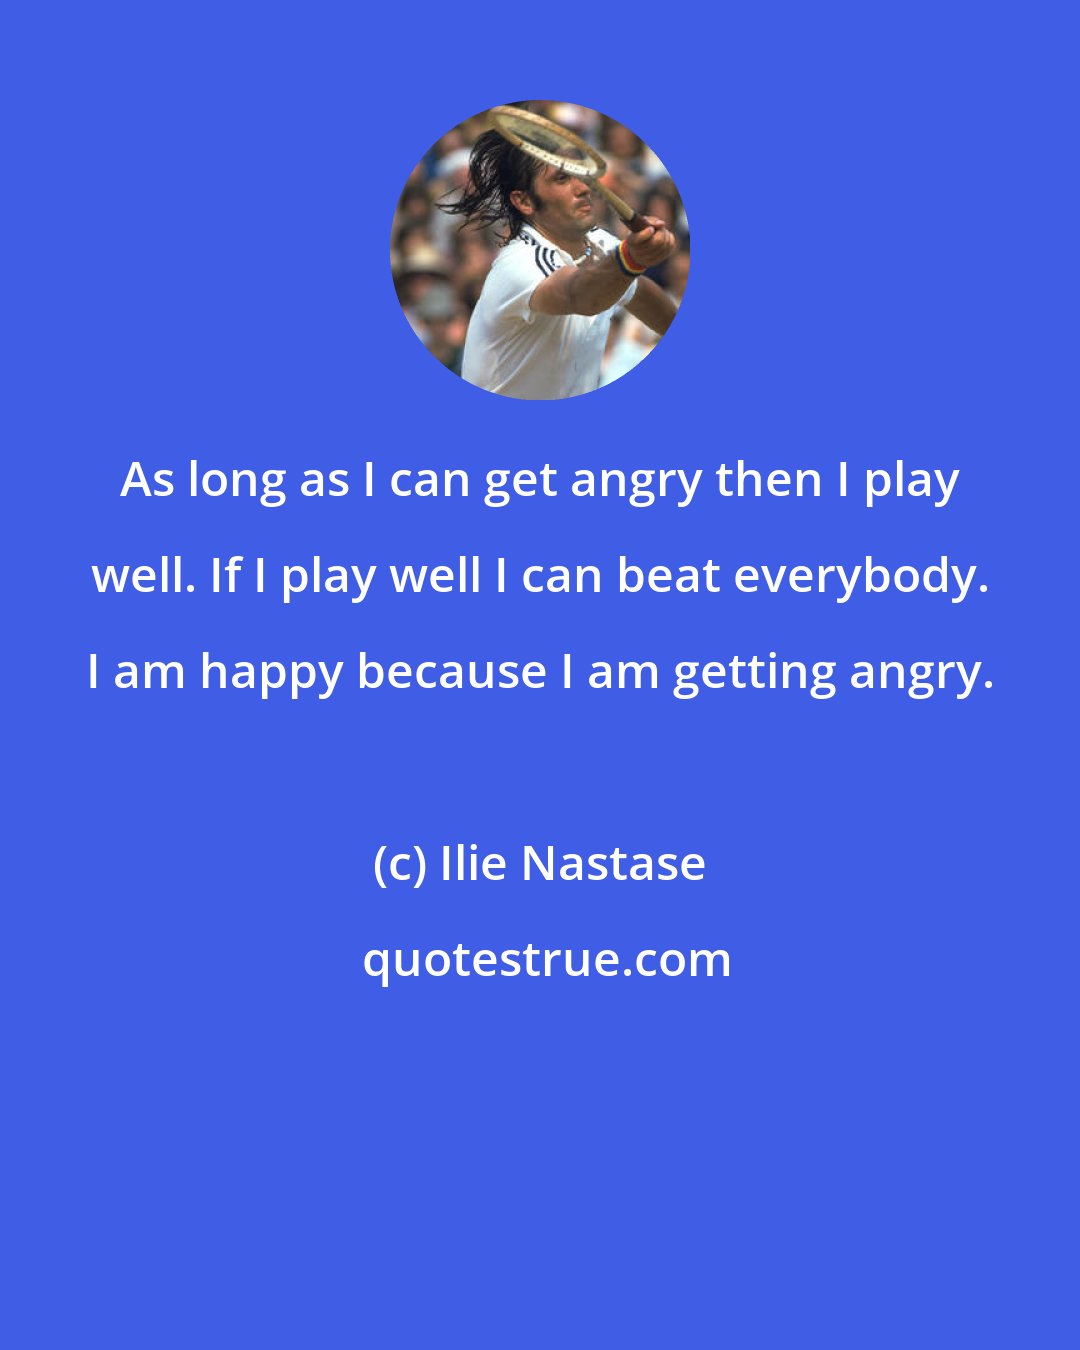 Ilie Nastase: As long as I can get angry then I play well. If I play well I can beat everybody. I am happy because I am getting angry.